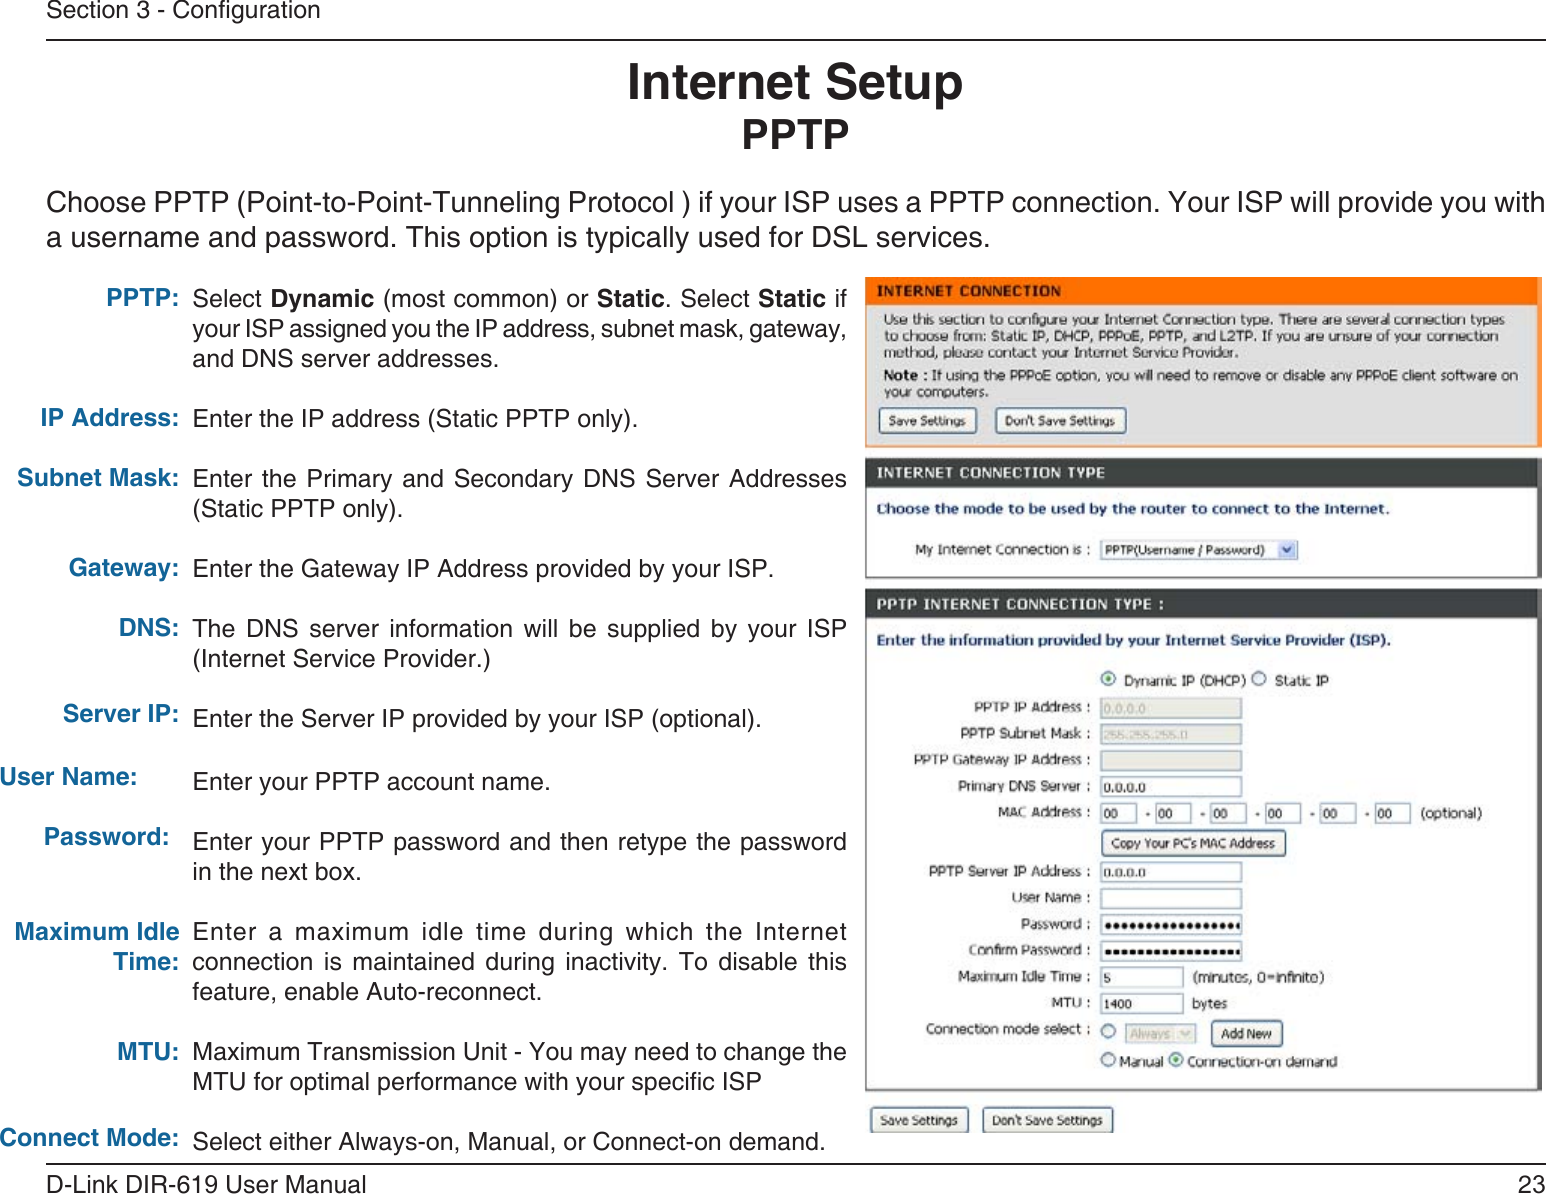 23D-Link DIR-619 User ManualSection 3 - CongurationSelect Dynamic (most common) or Static. Select Static if your ISP assigned you the IP address, subnet mask, gateway, and DNS server addresses.Enter the IP address (Static PPTP only).Enter the Primary and  Secondary  DNS Server Addresses (Static PPTP only).Enter the Gateway IP Address provided by your ISP.The  DNS  server  information  will  be  supplied  by  your  ISP (Internet Service Provider.)Enter the Server IP provided by your ISP (optional).Enter your PPTP account name.Enter your PPTP password and then retype the password in the next box.Enter a maximum idle time during which the Internet connection  is  maintained  during  inactivity.  To  disable  this feature, enable Auto-reconnect.Maximum Transmission Unit - You may need to change the MTU for optimal performance with your specic ISP Select either Always-on, Manual, or Connect-on demand.PPTP:IP Address:Subnet Mask:Gateway:DNS:Internet SetupPPTPChoose PPTP (Point-to-Point-Tunneling Protocol ) if your ISP uses a PPTP connection. Your ISP will provide you witha username and password. This option is typically used for DSL services. Server IP:       User Name:         Password:Maximum Idle Time:MTU:Connect Mode: